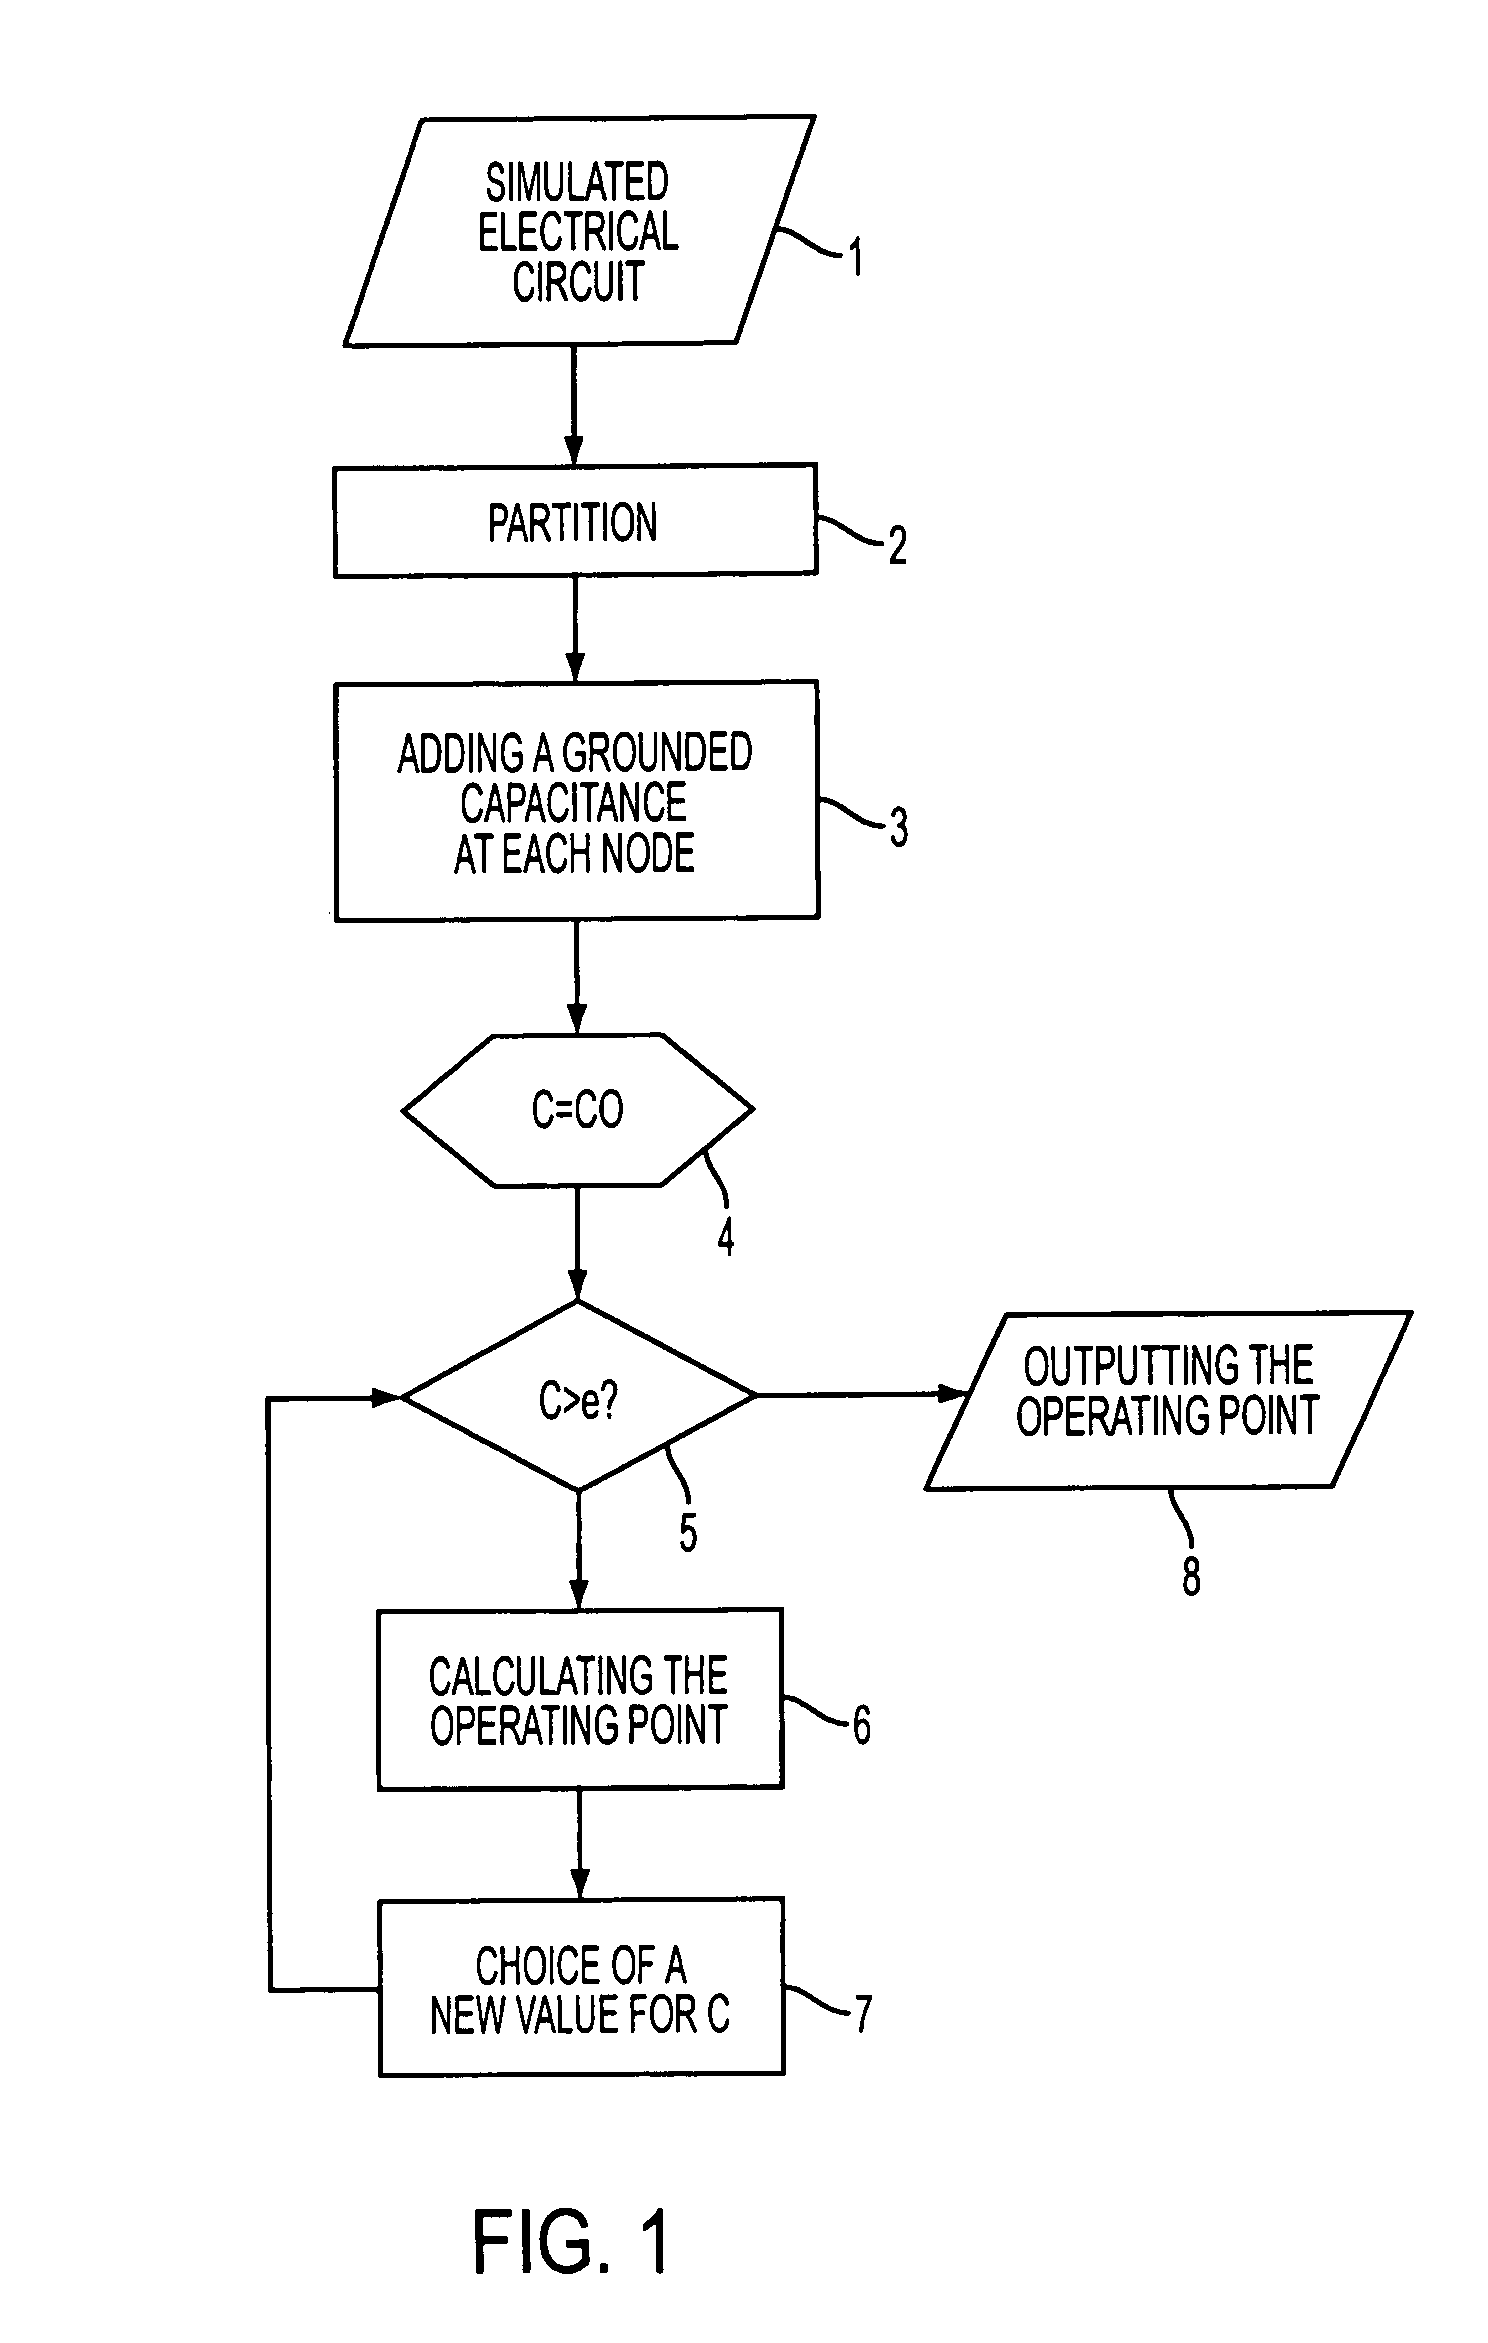 Computer-assisted method for the parallel calculation of the operating point of electric circuits